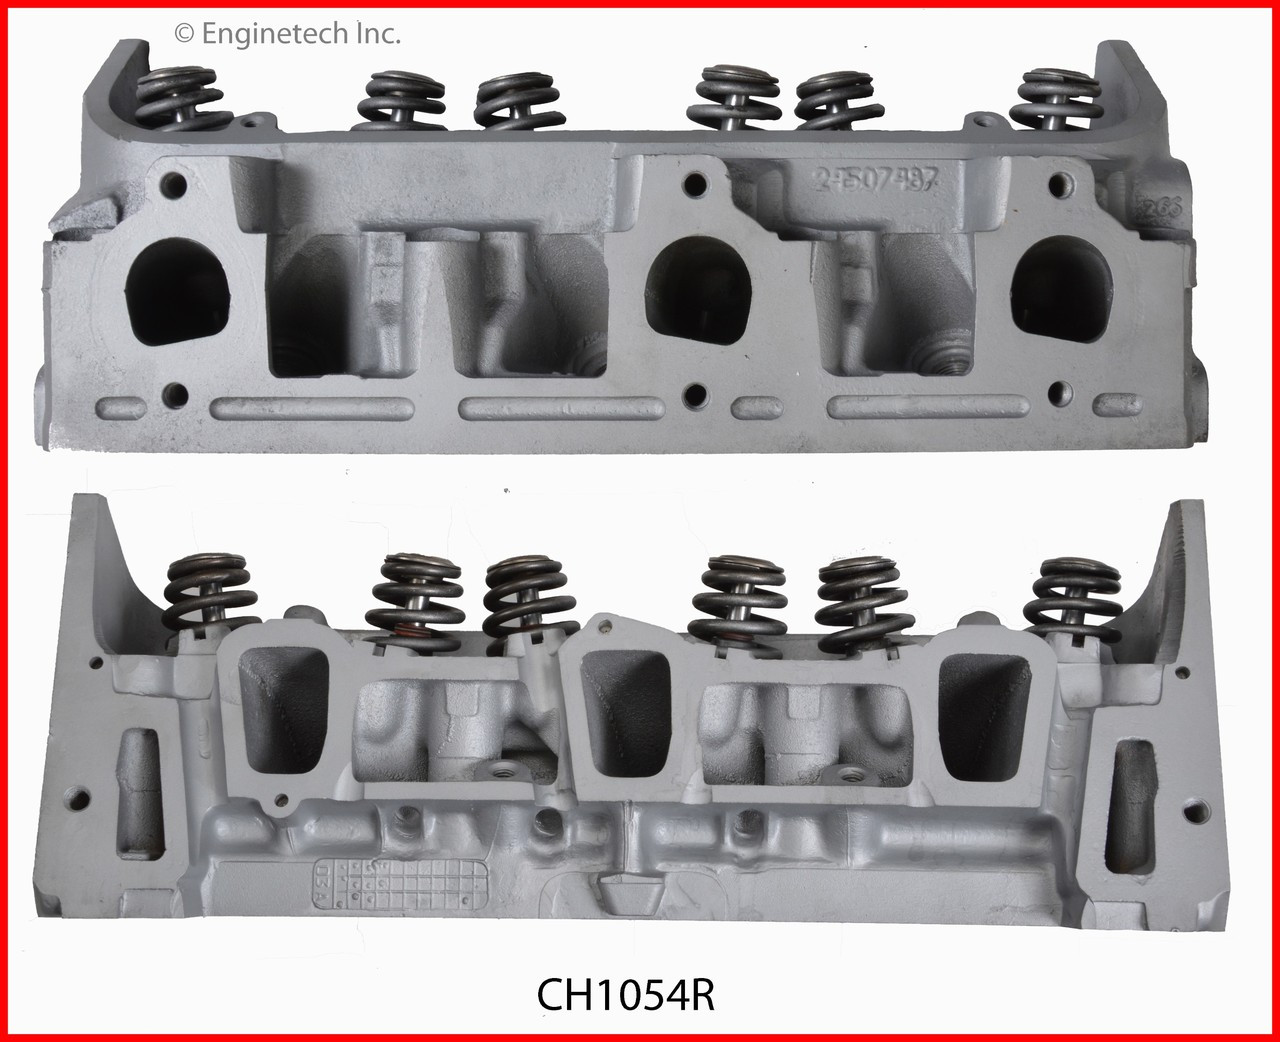 Cylinder Head Assembly - 1999 Oldsmobile Alero 3.4L (CH1054R.A1)